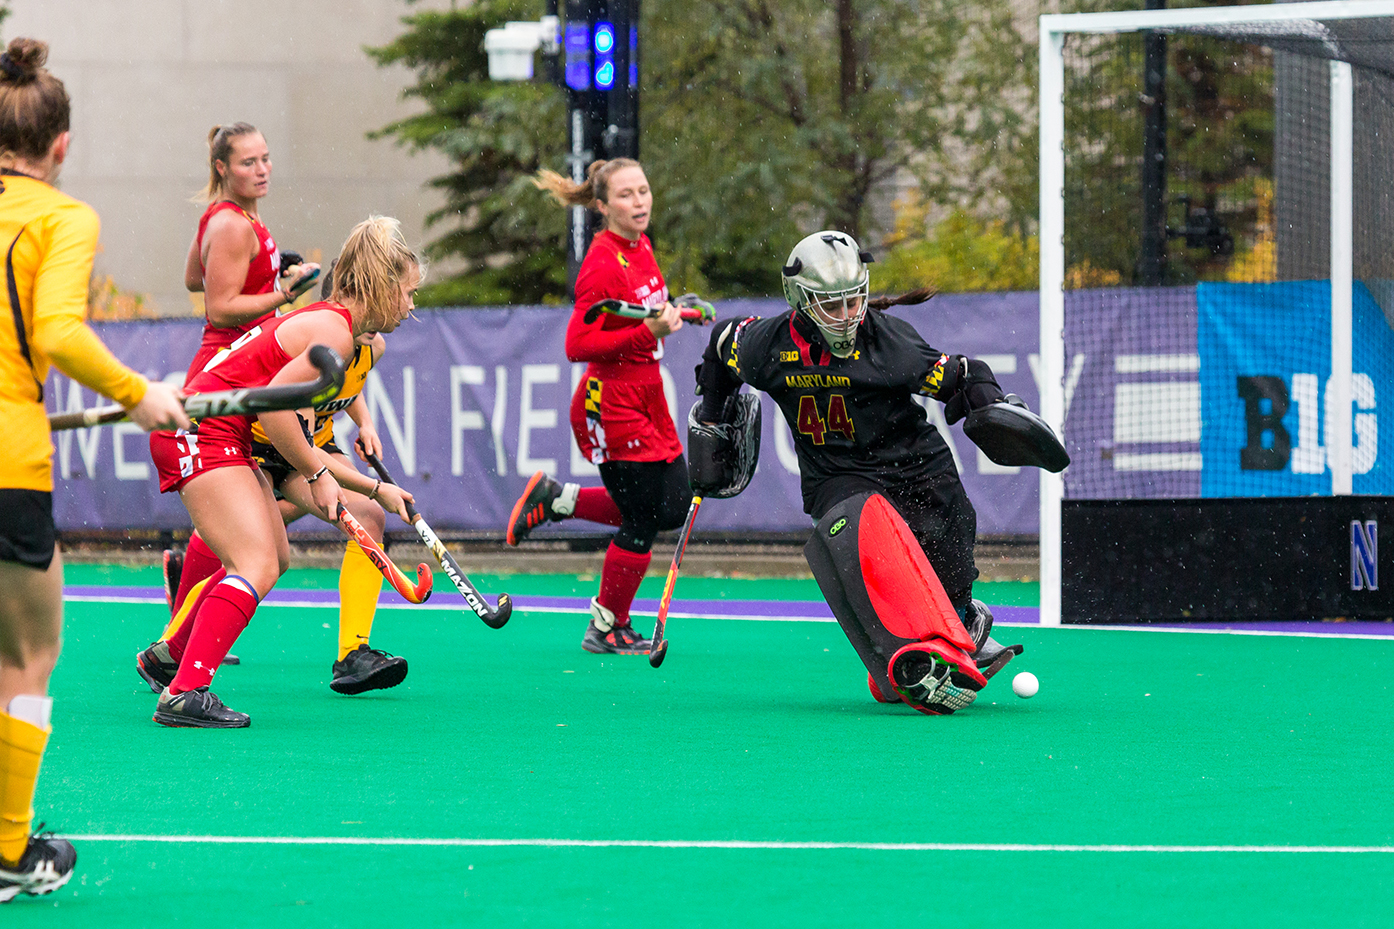  Maryland Goalkeeper Sarah Holliday kick-saves the ball during the Championship Game in the Big Ten Field Hockey Tournament at Lakeside Field in Evanston, IL on Sunday, Nov. 3, 2018. The no. 2 ranked Terrapins defeated the no. 8 ranked Hawkeyes 2-1. 